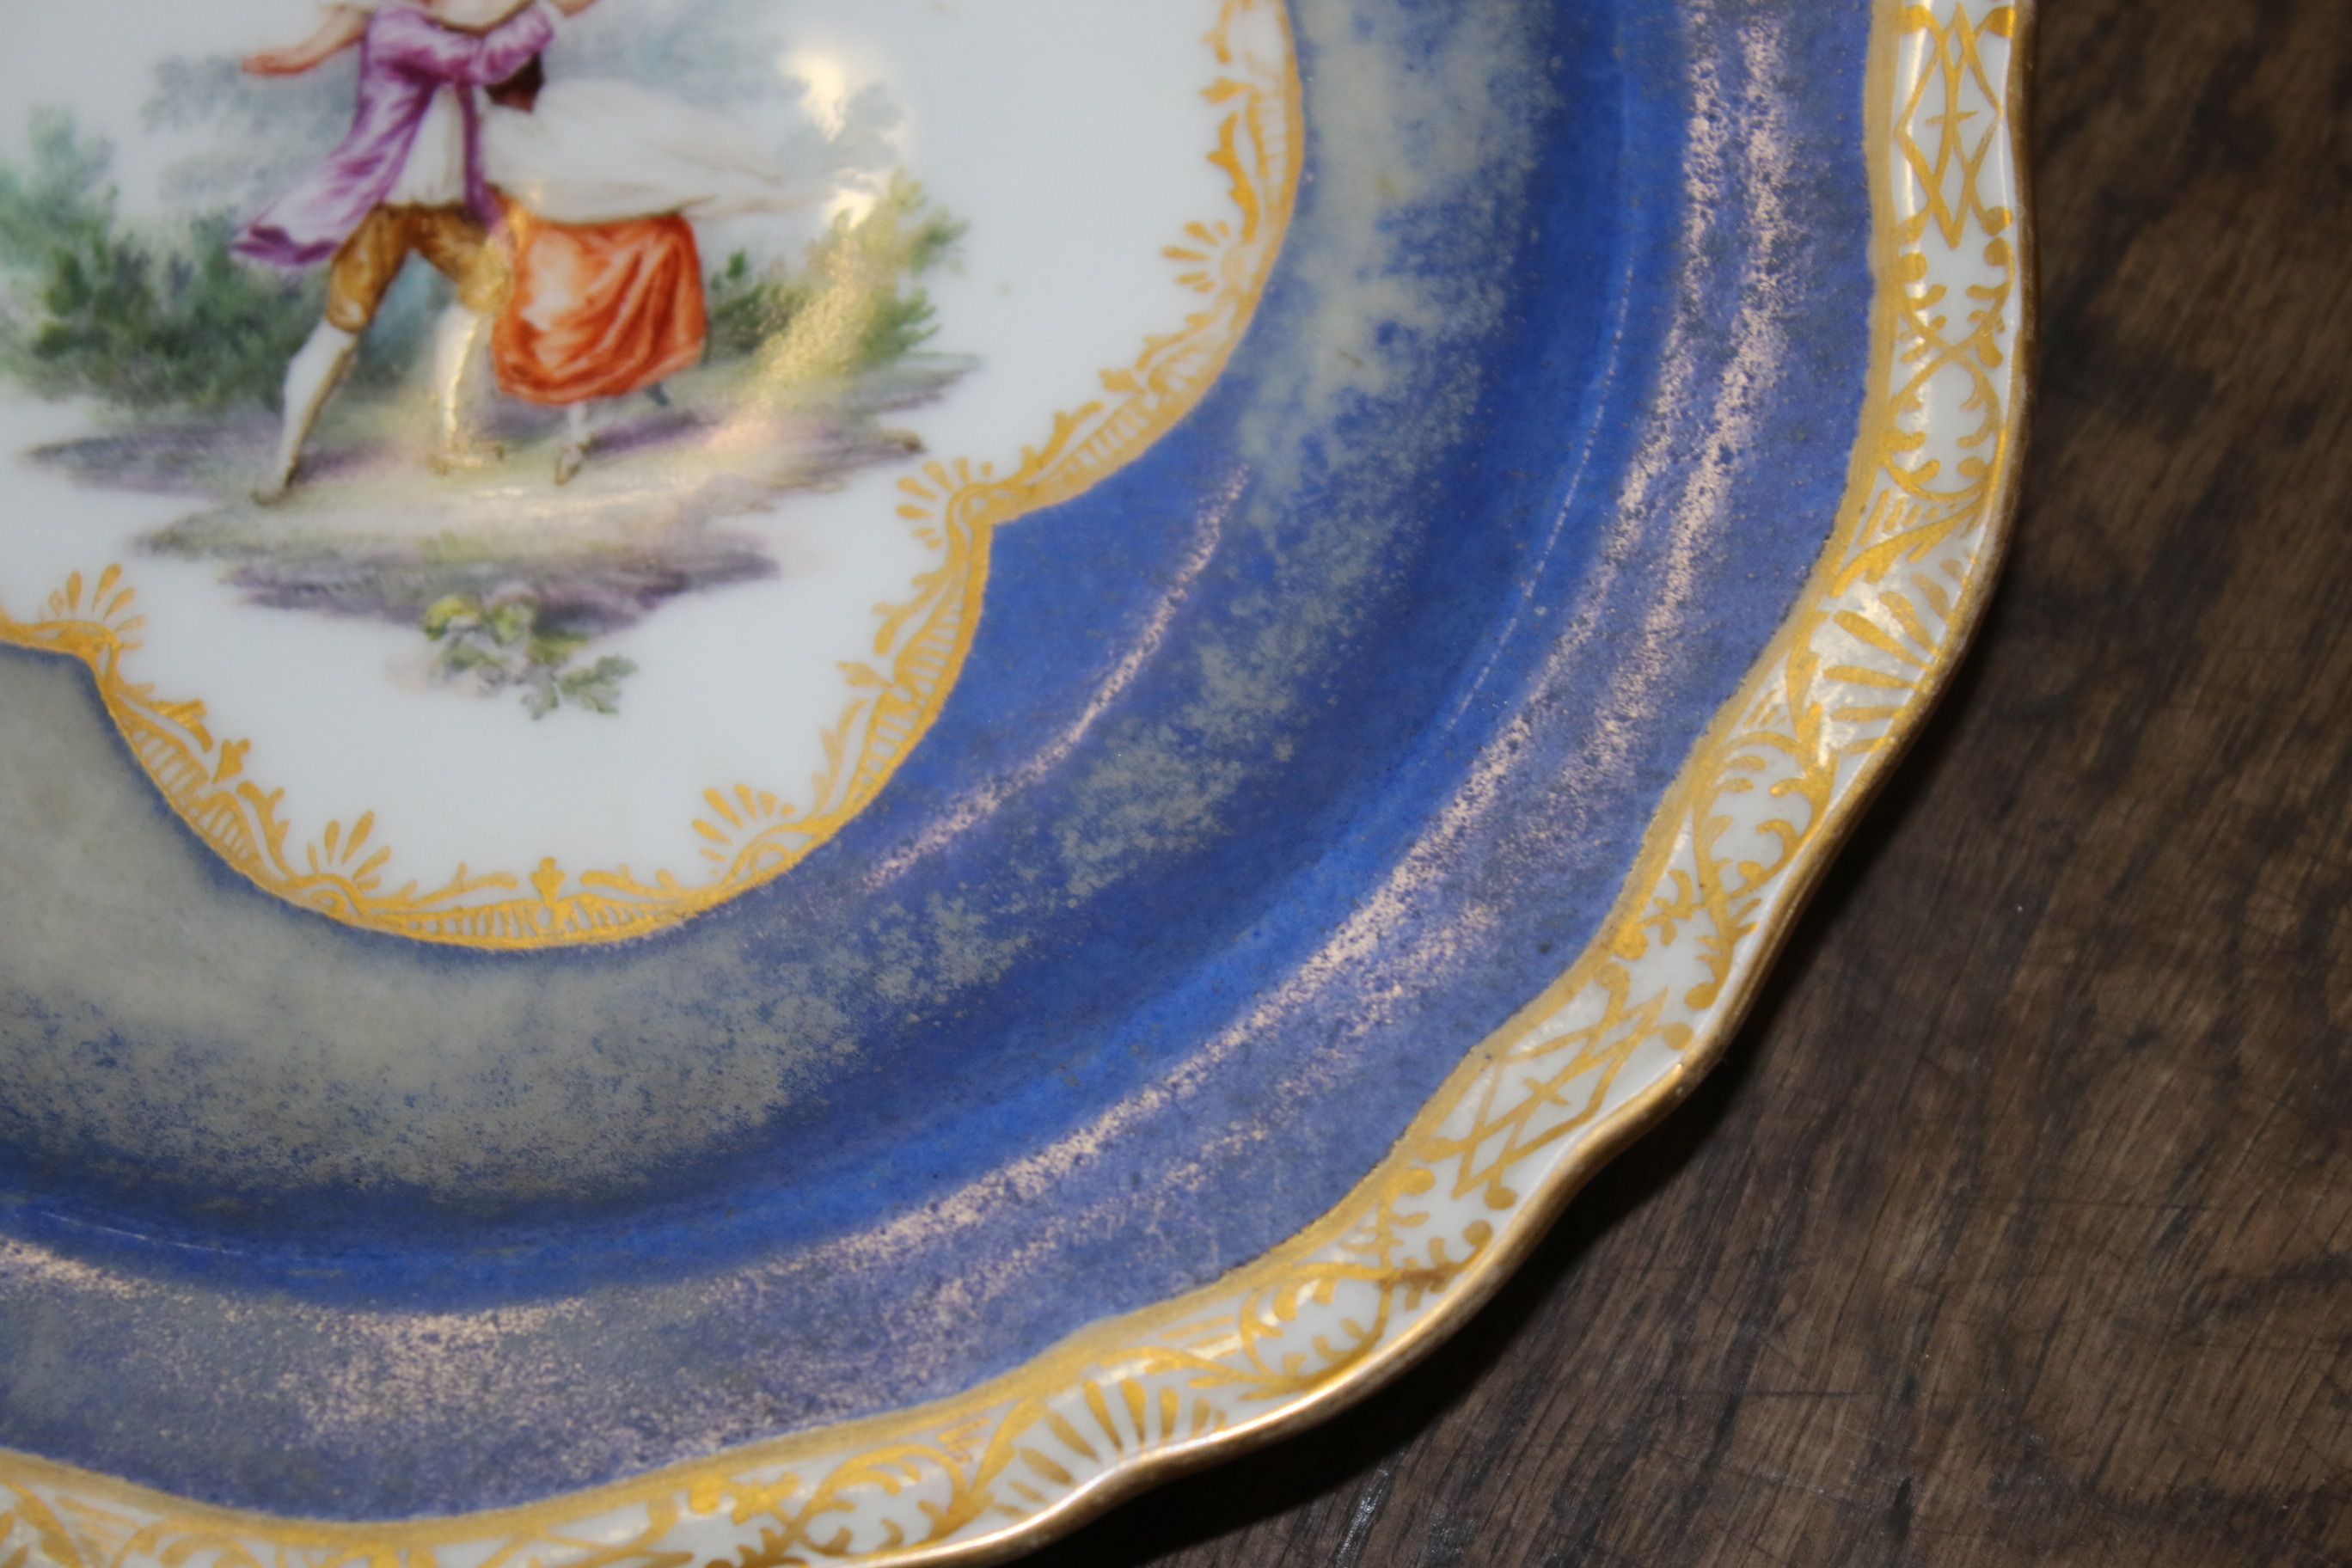 A 19th century Meissen plate. - Image 3 of 9